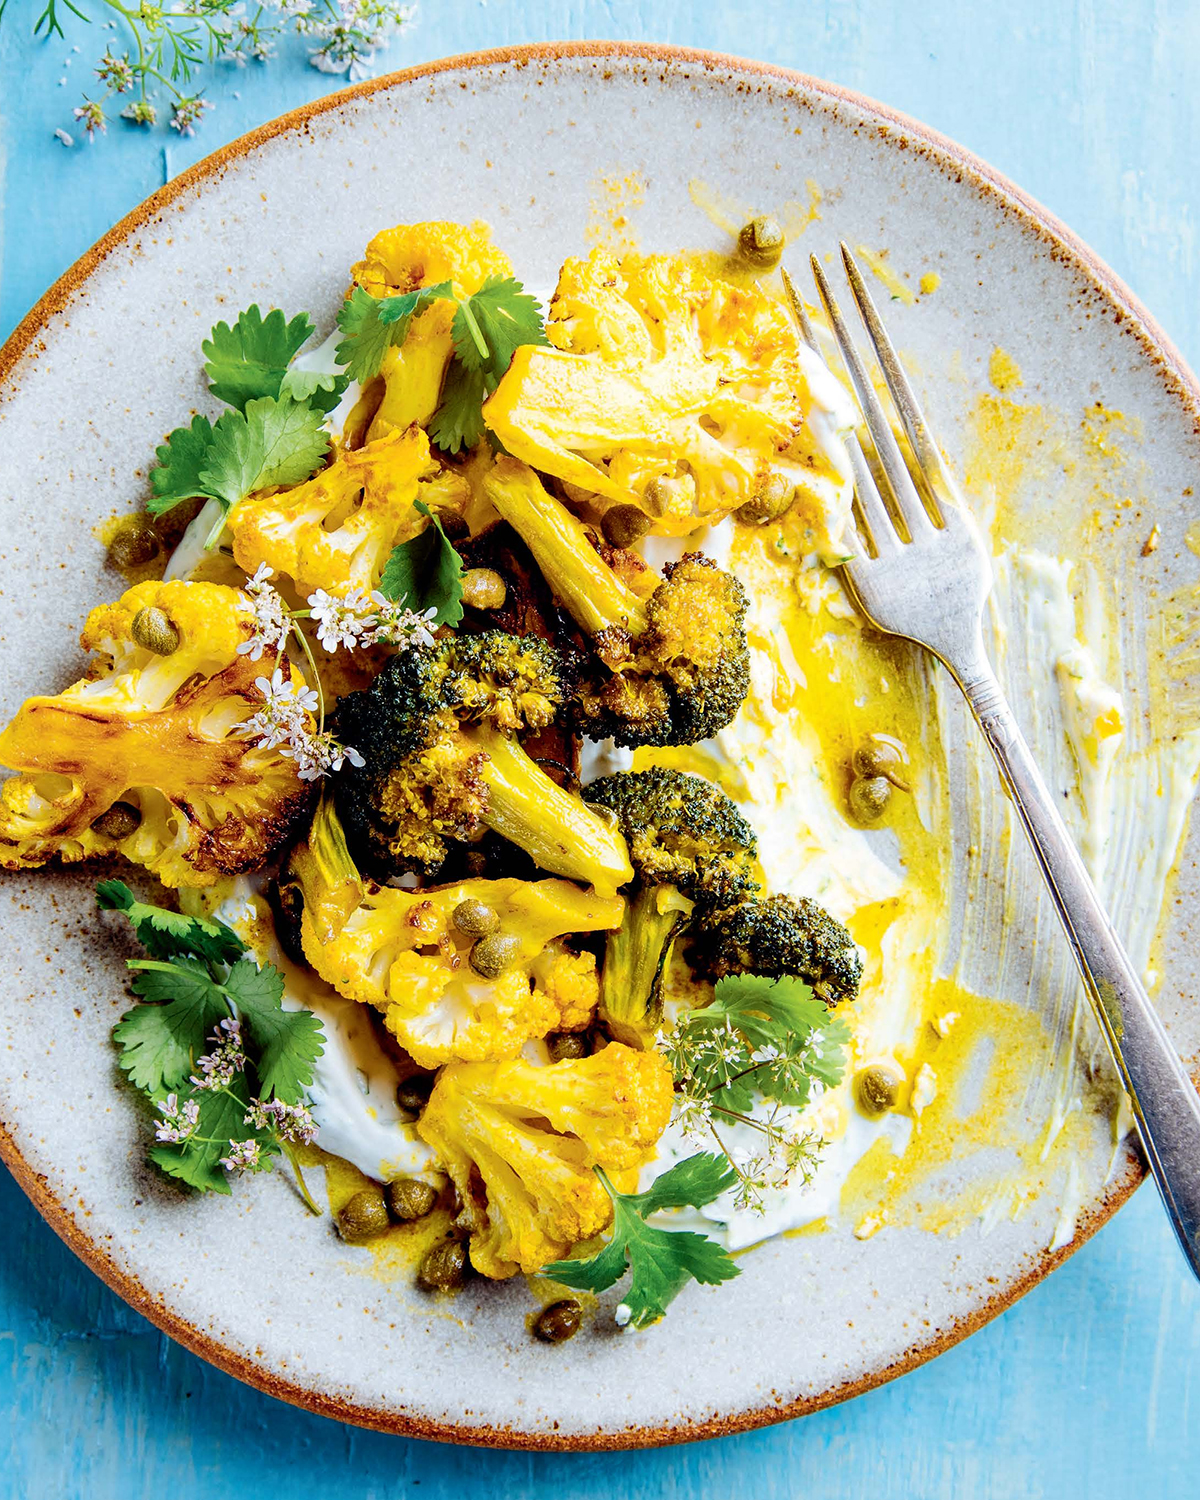 Turmeric-Spiced Cauliflower and Broccoli with Capers